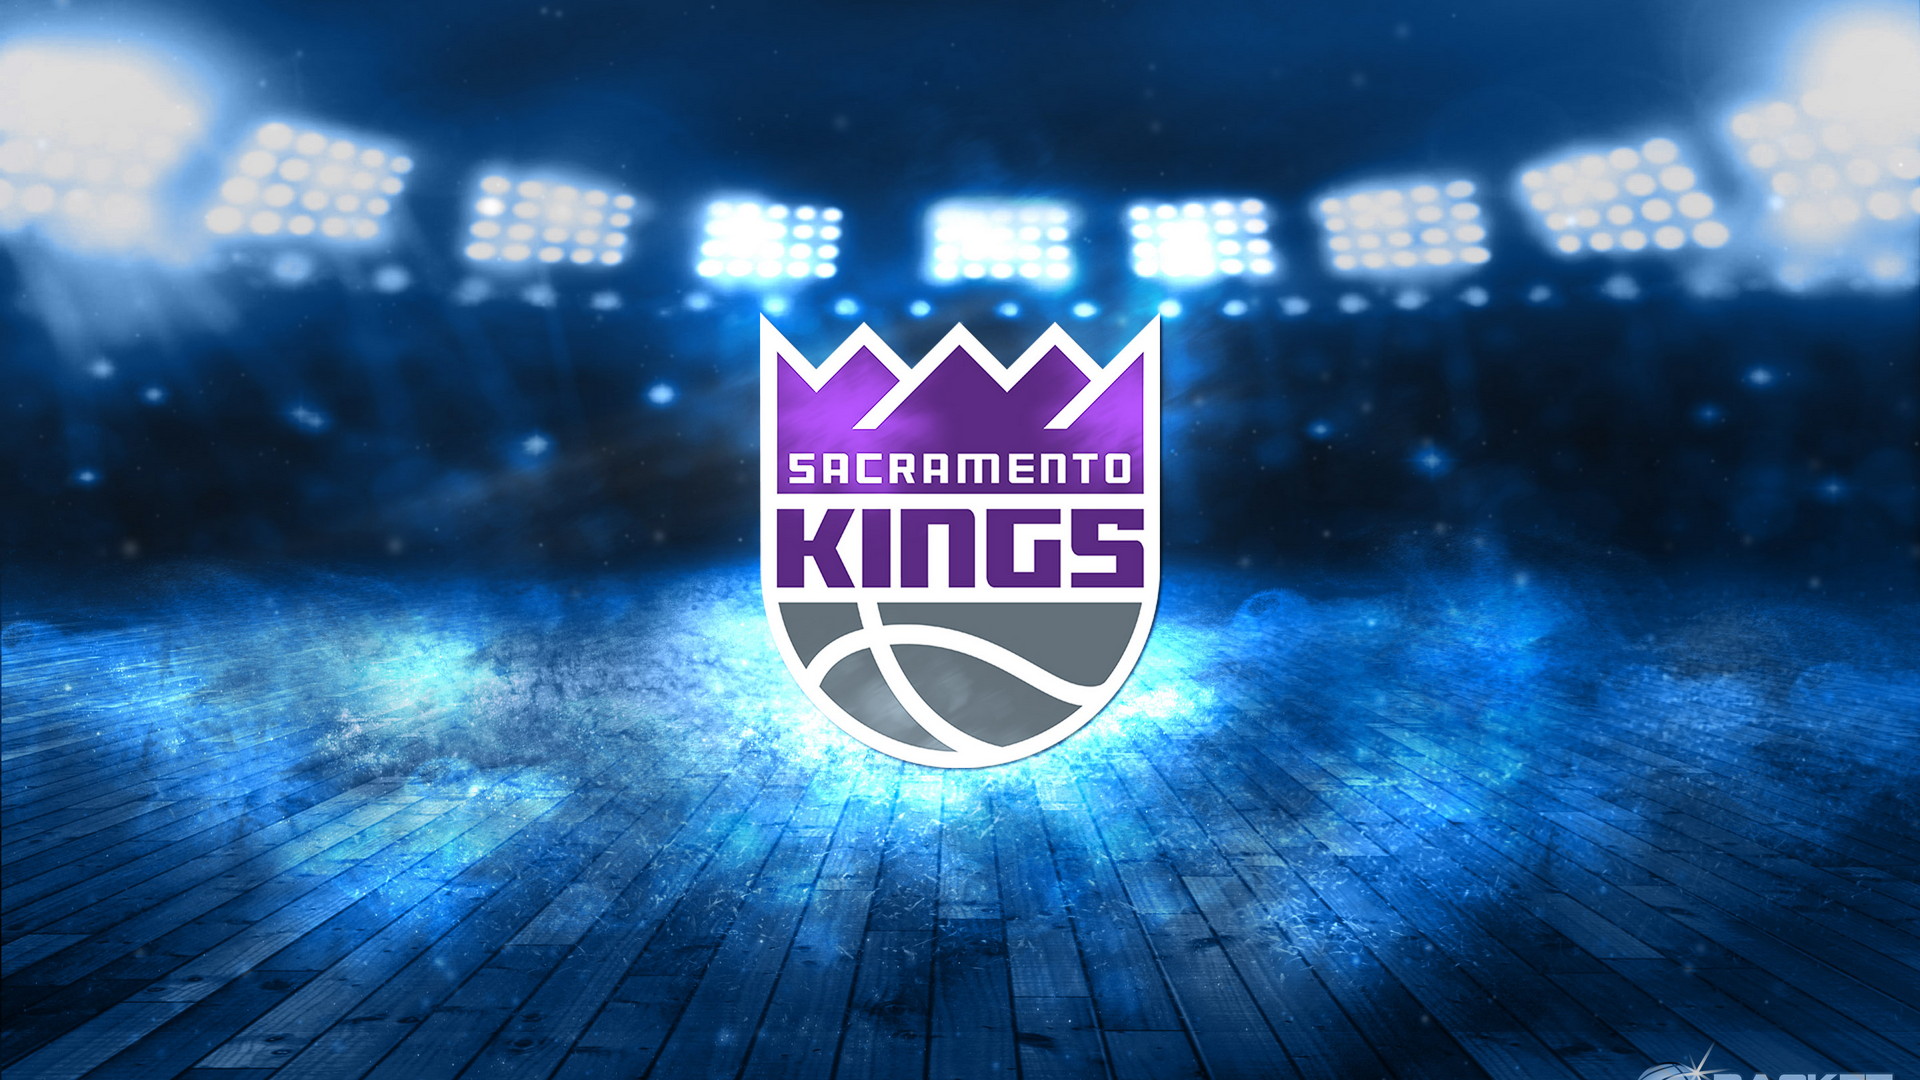 Wallpapers HD Sacramento Kings Logo with high-resolution 1920x1080 pixel. You can use this wallpaper for your Desktop Computer Backgrounds, Windows or Mac Screensavers, iPhone Lock screen, Tablet or Android and another Mobile Phone device